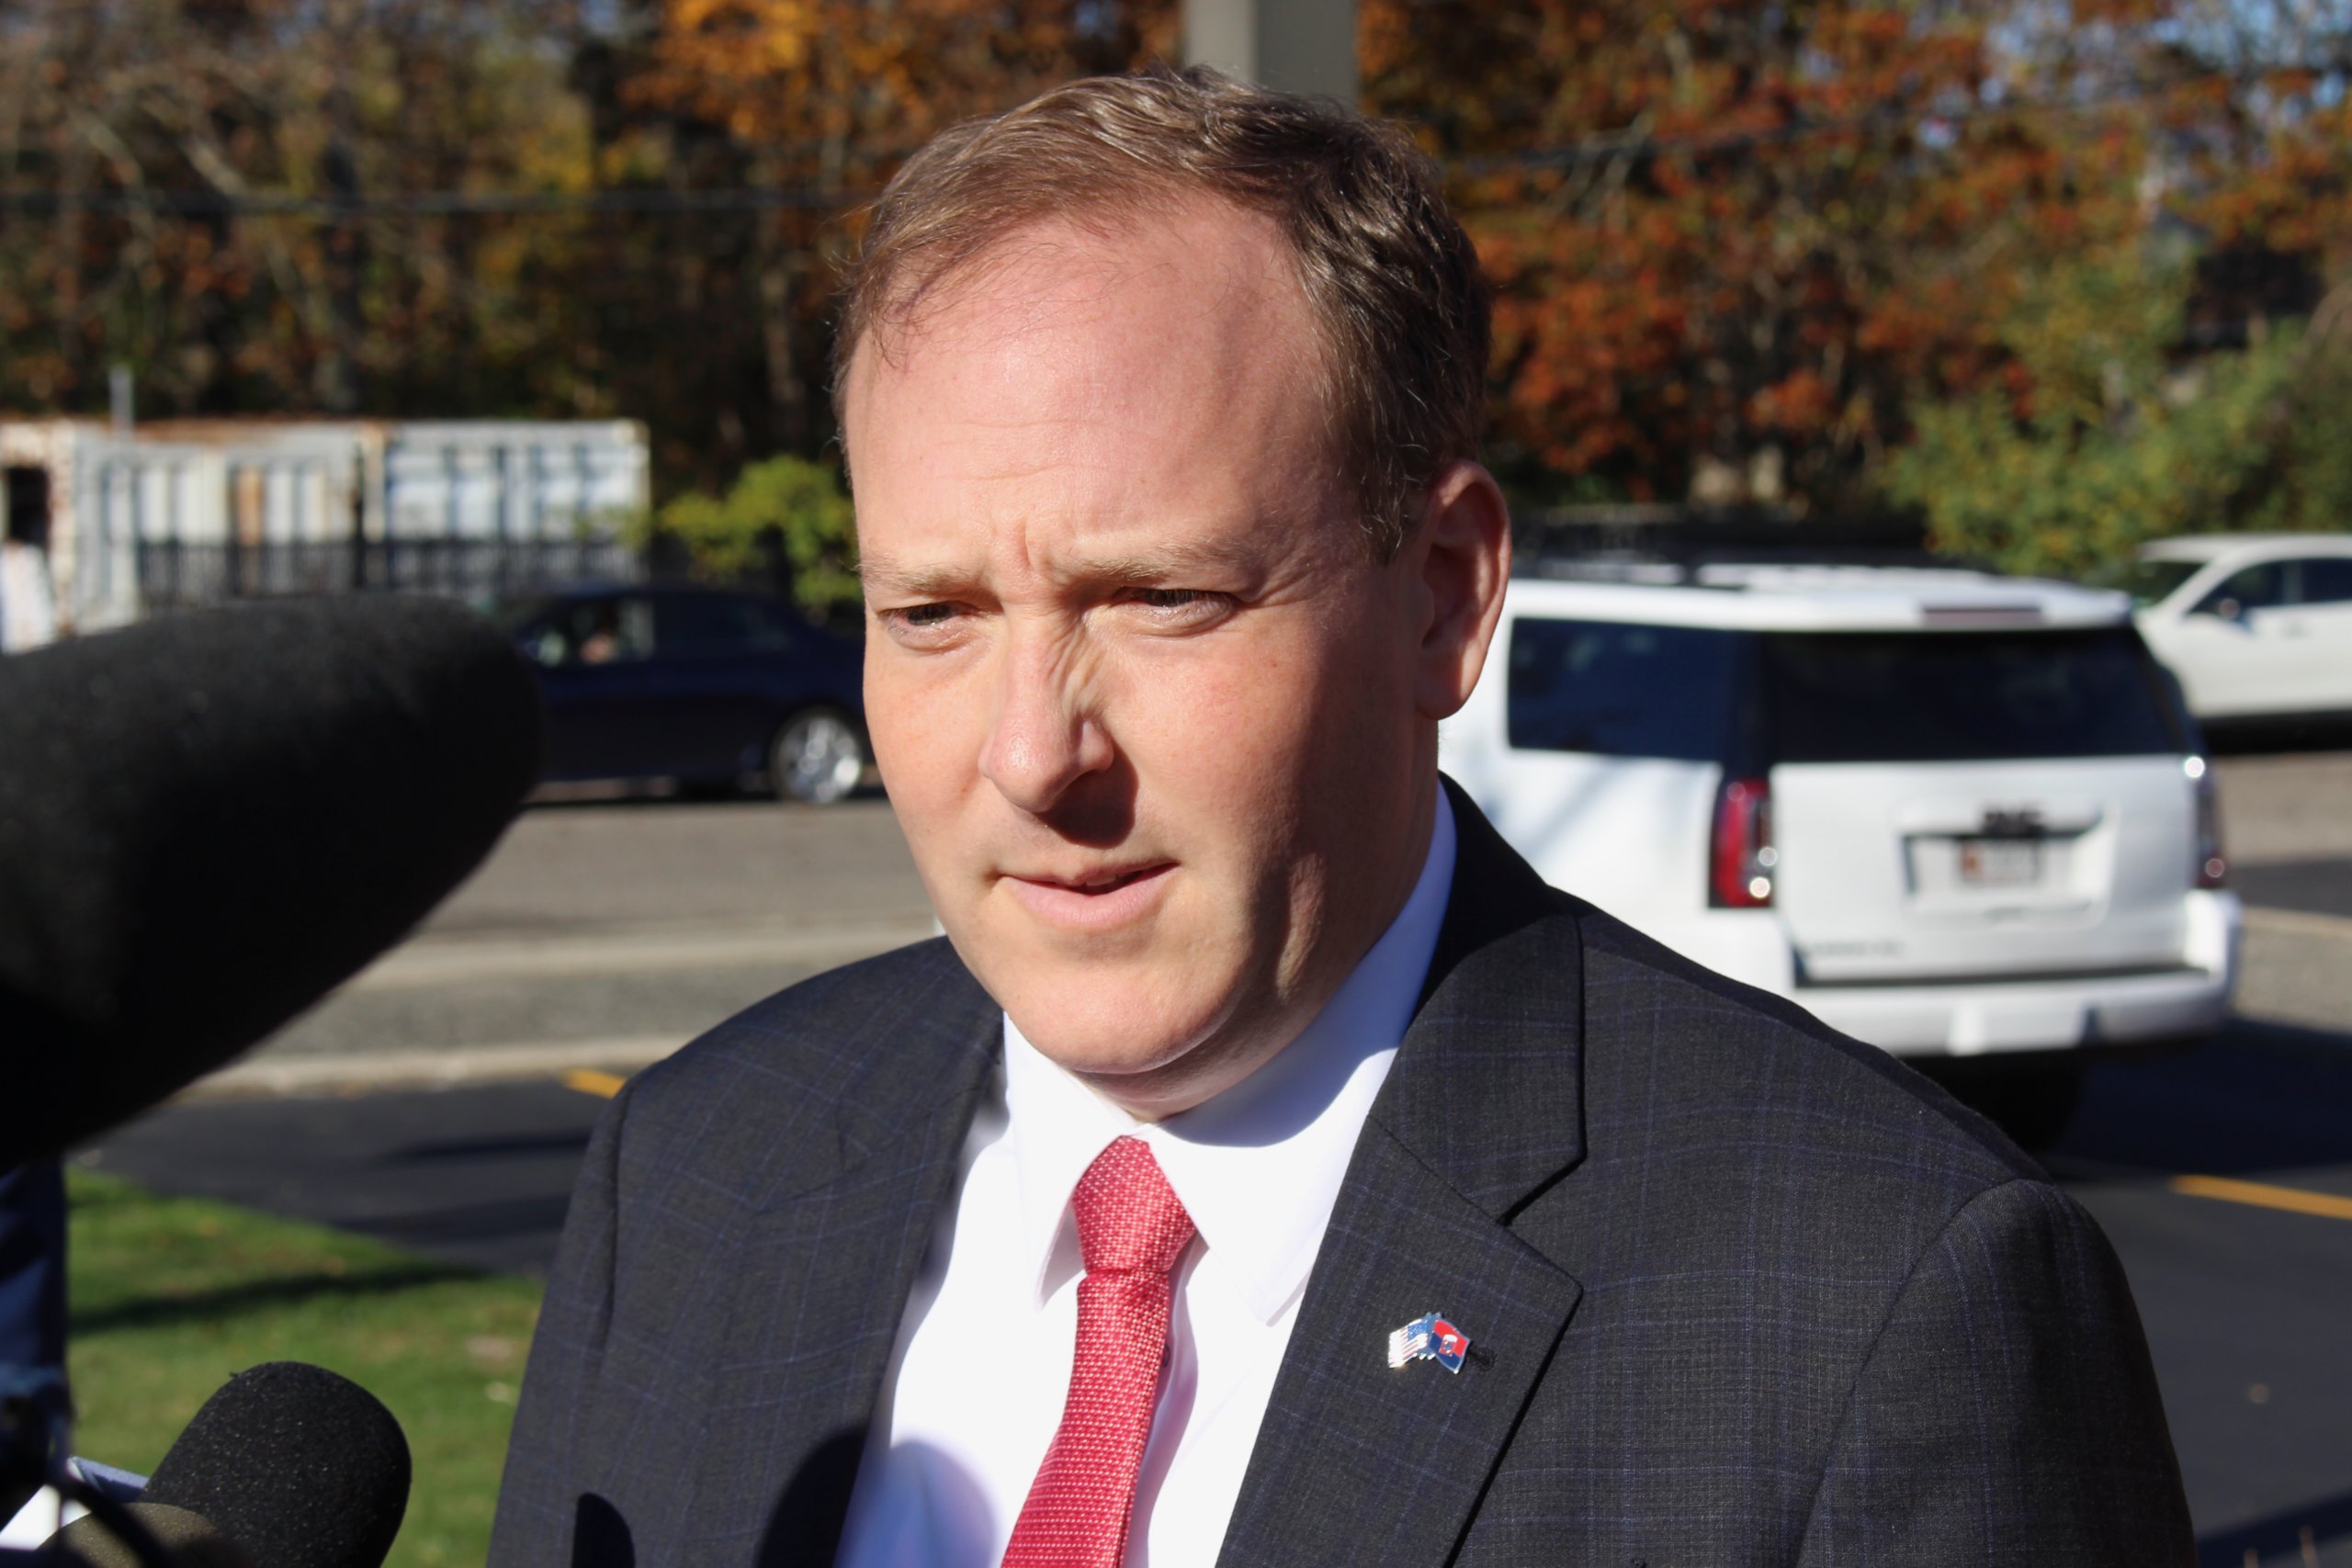 Lee Zeldin speaks to media outside his polling place in Mastic on Election Day 2022